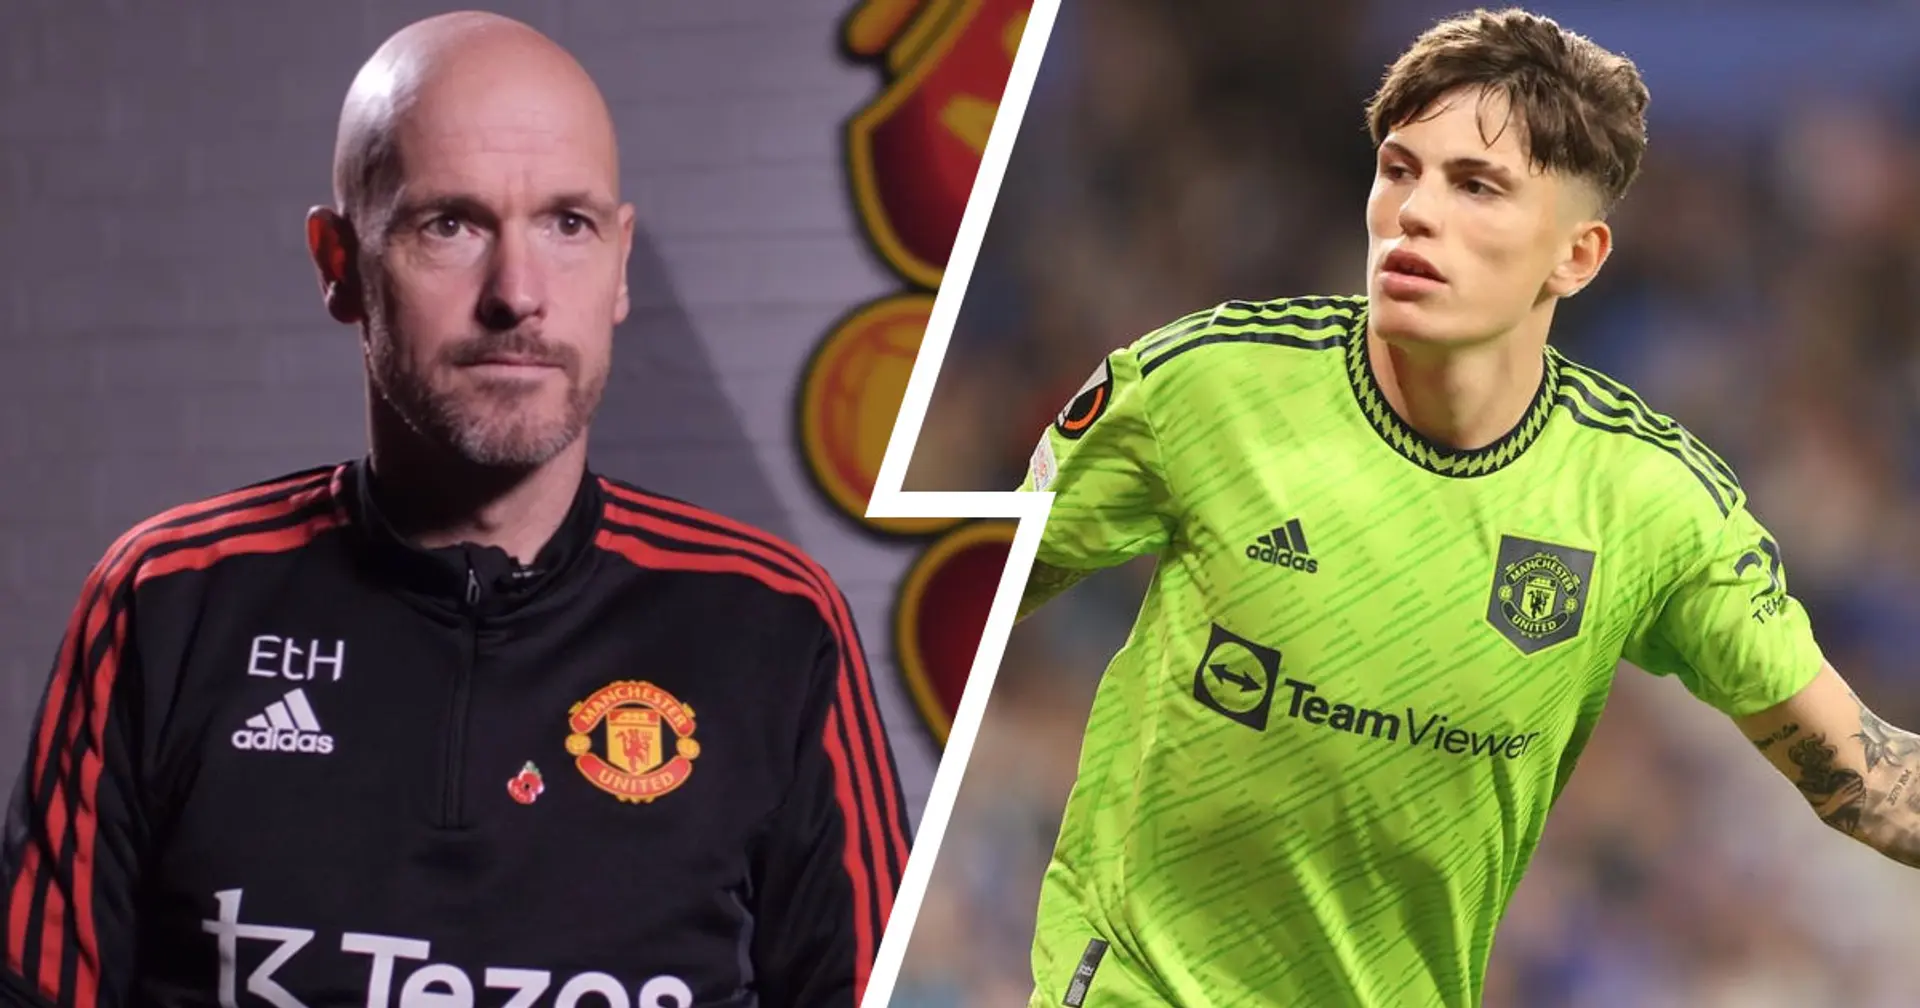 Ten Hag details his plans to help Garnacho become world-class forward at Man United